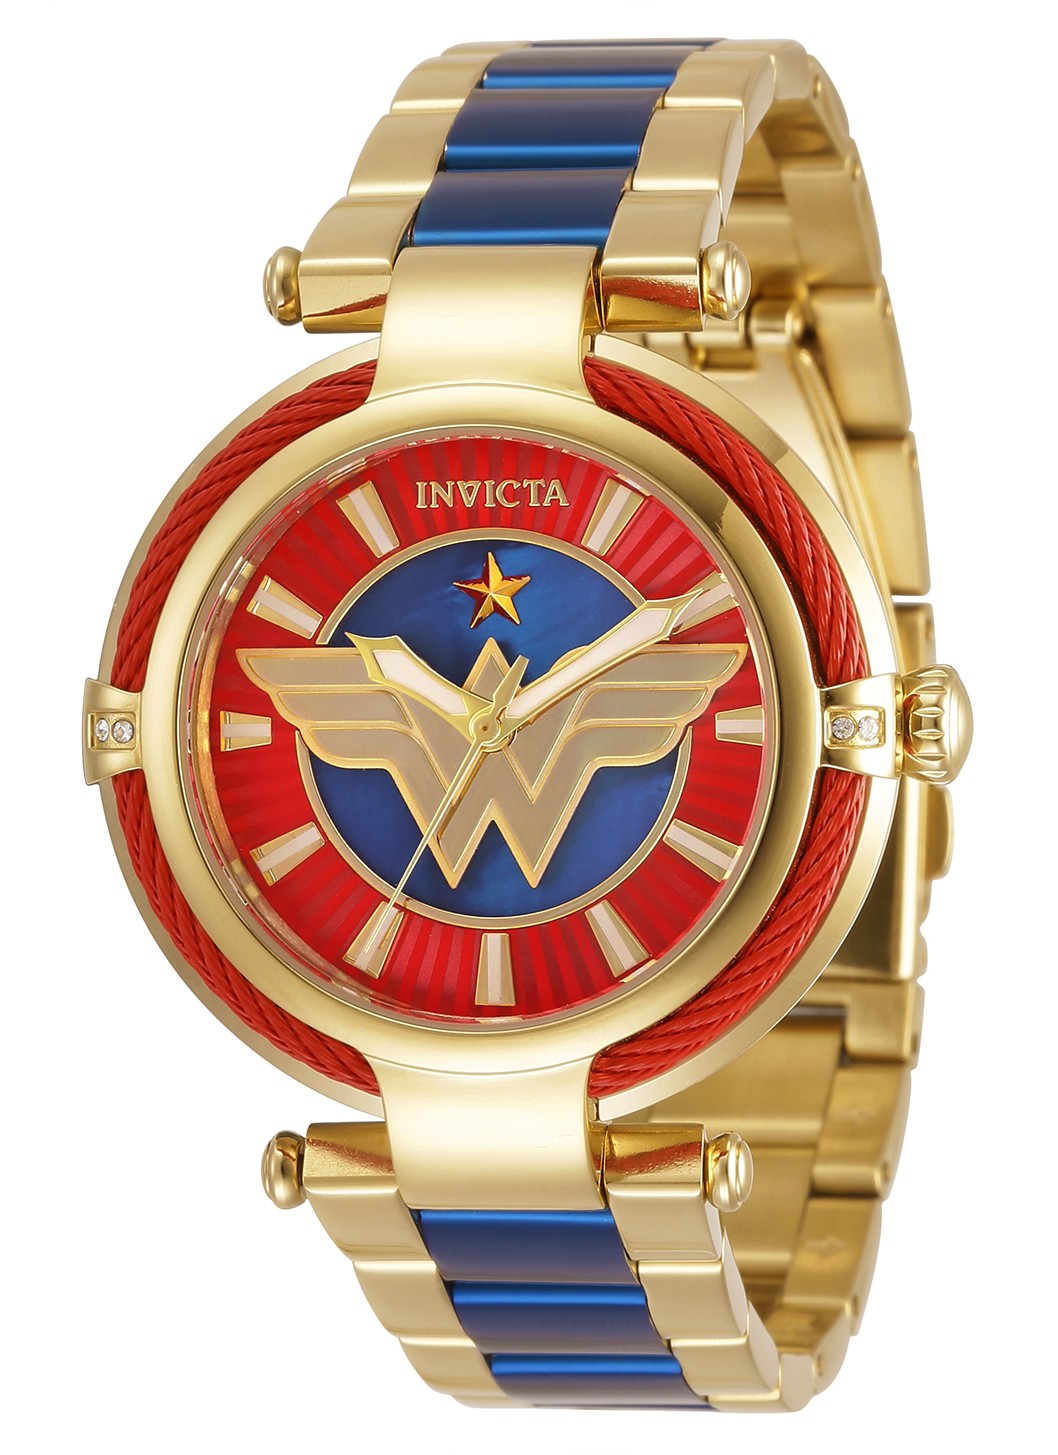 Invicta DC Comics Wonder Woman Quartz Women's Watch - 40mm Stainless Steel Case, Stainless Steel Band, Gold, Blue (34954)